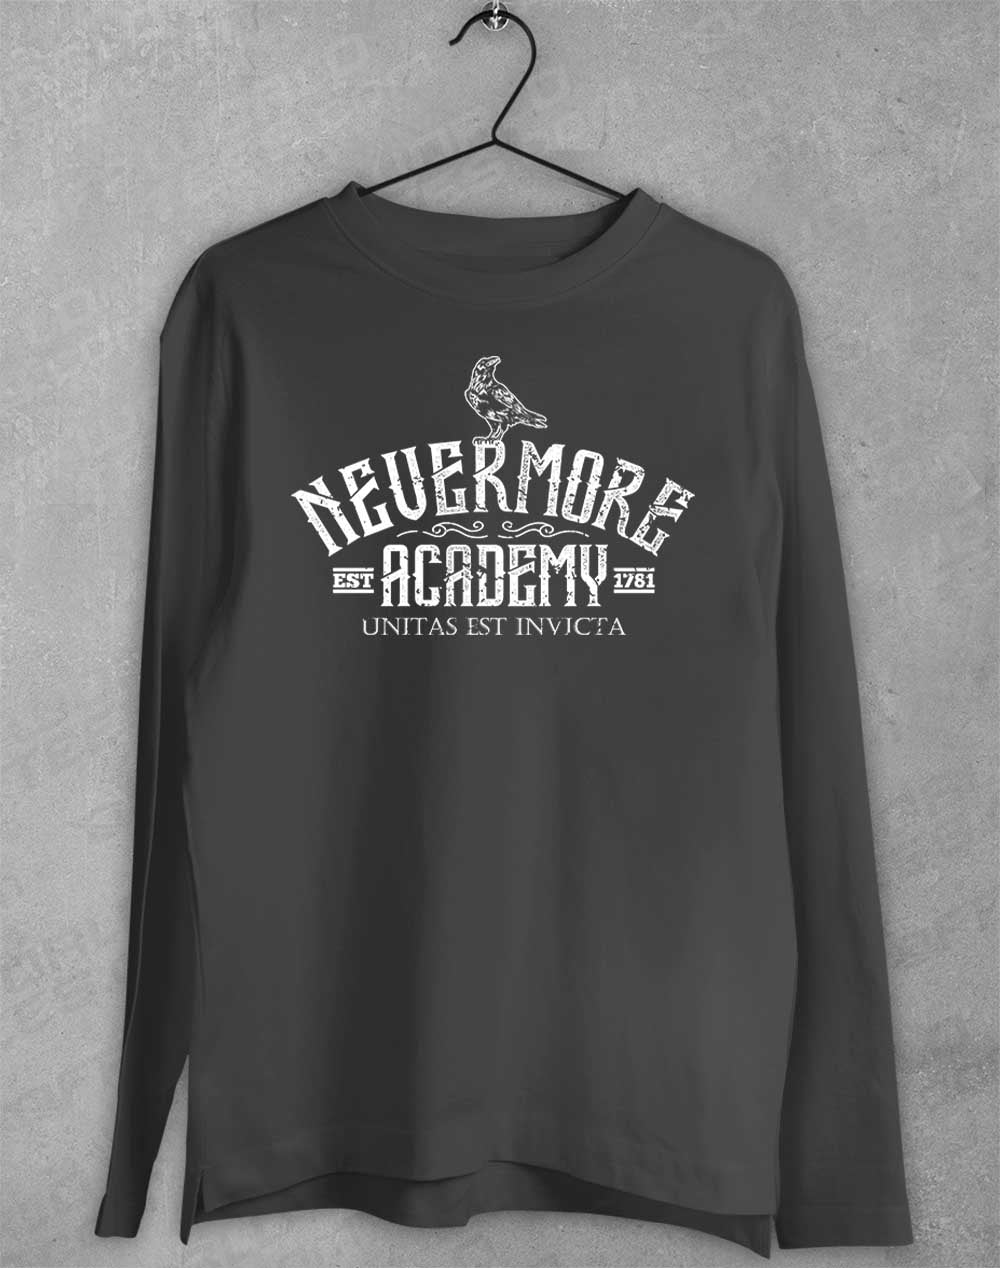 Charcoal - Nevermore Academy Long Sleeve T-Shirt